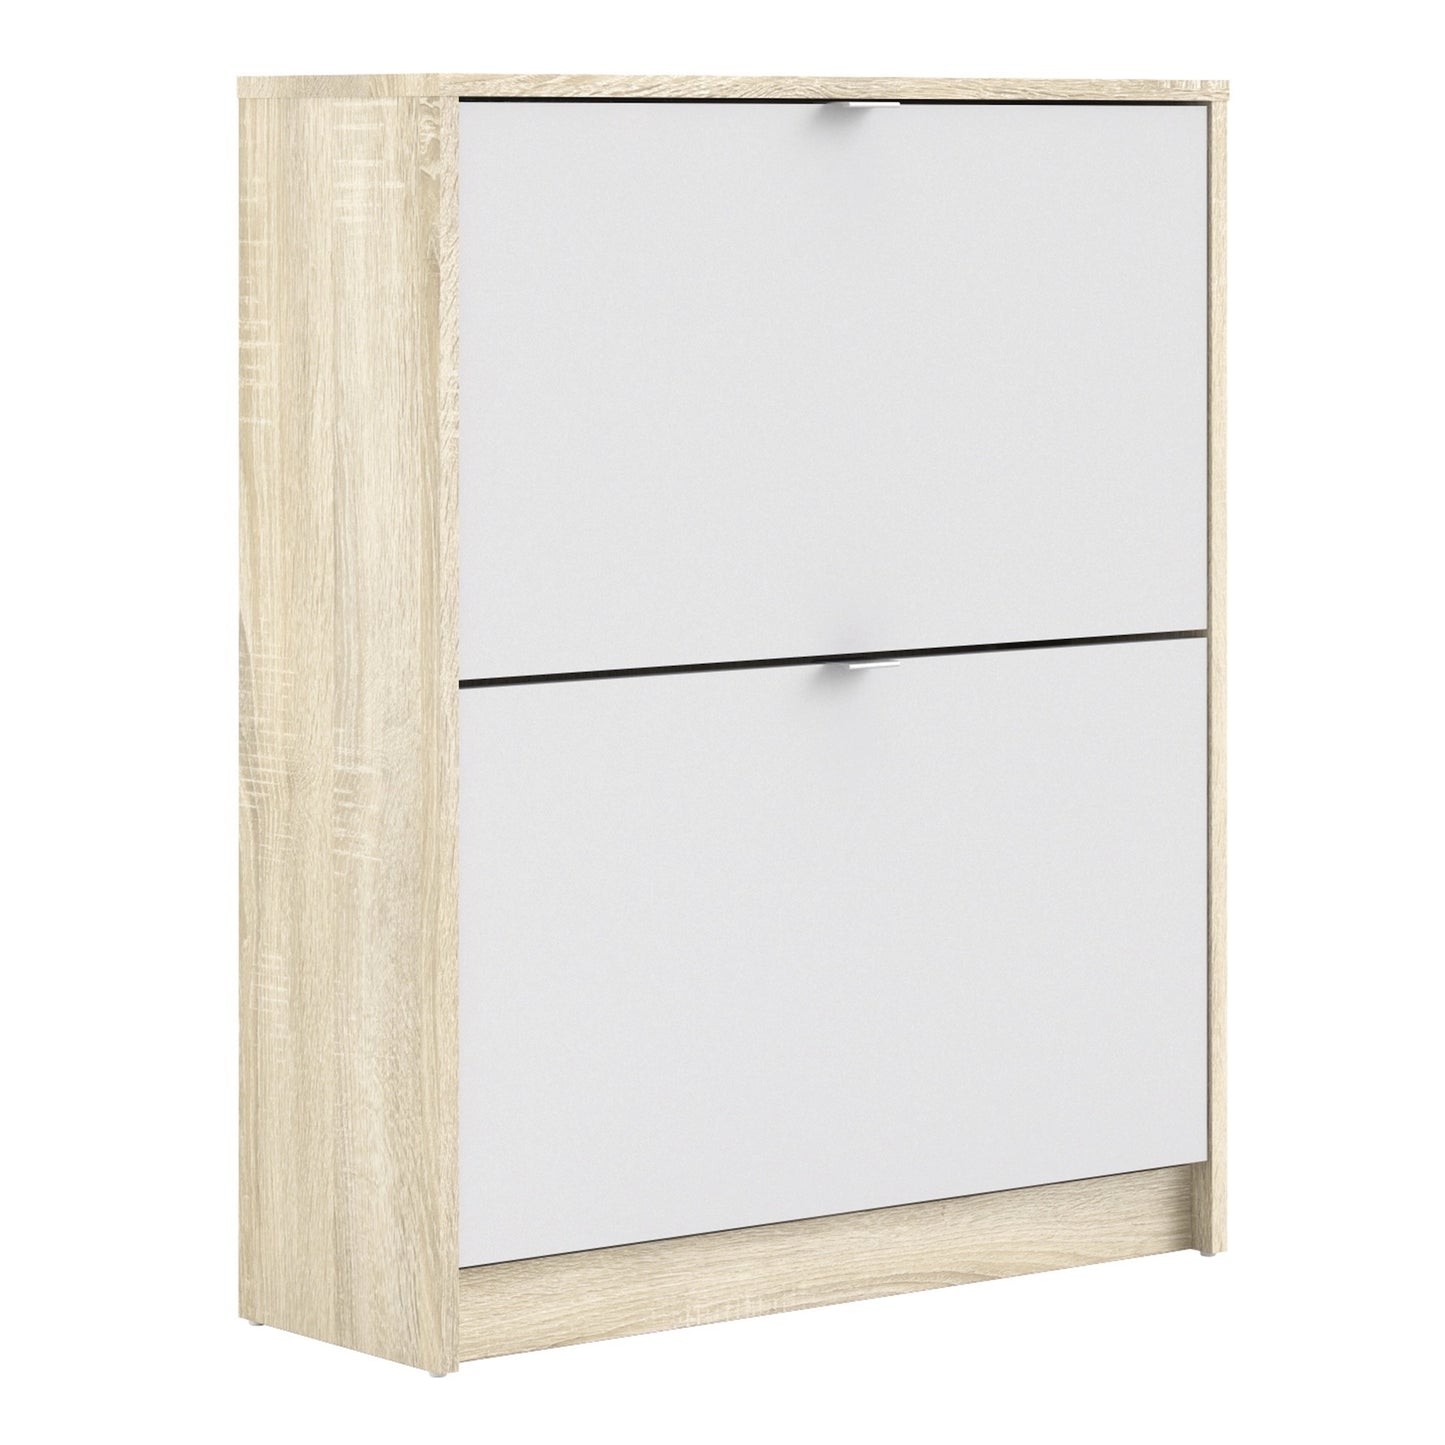 Furniture To Go Shoes Shoe Cabinet W. 2 Tilting Doors & 2 Layers Oak Structure White